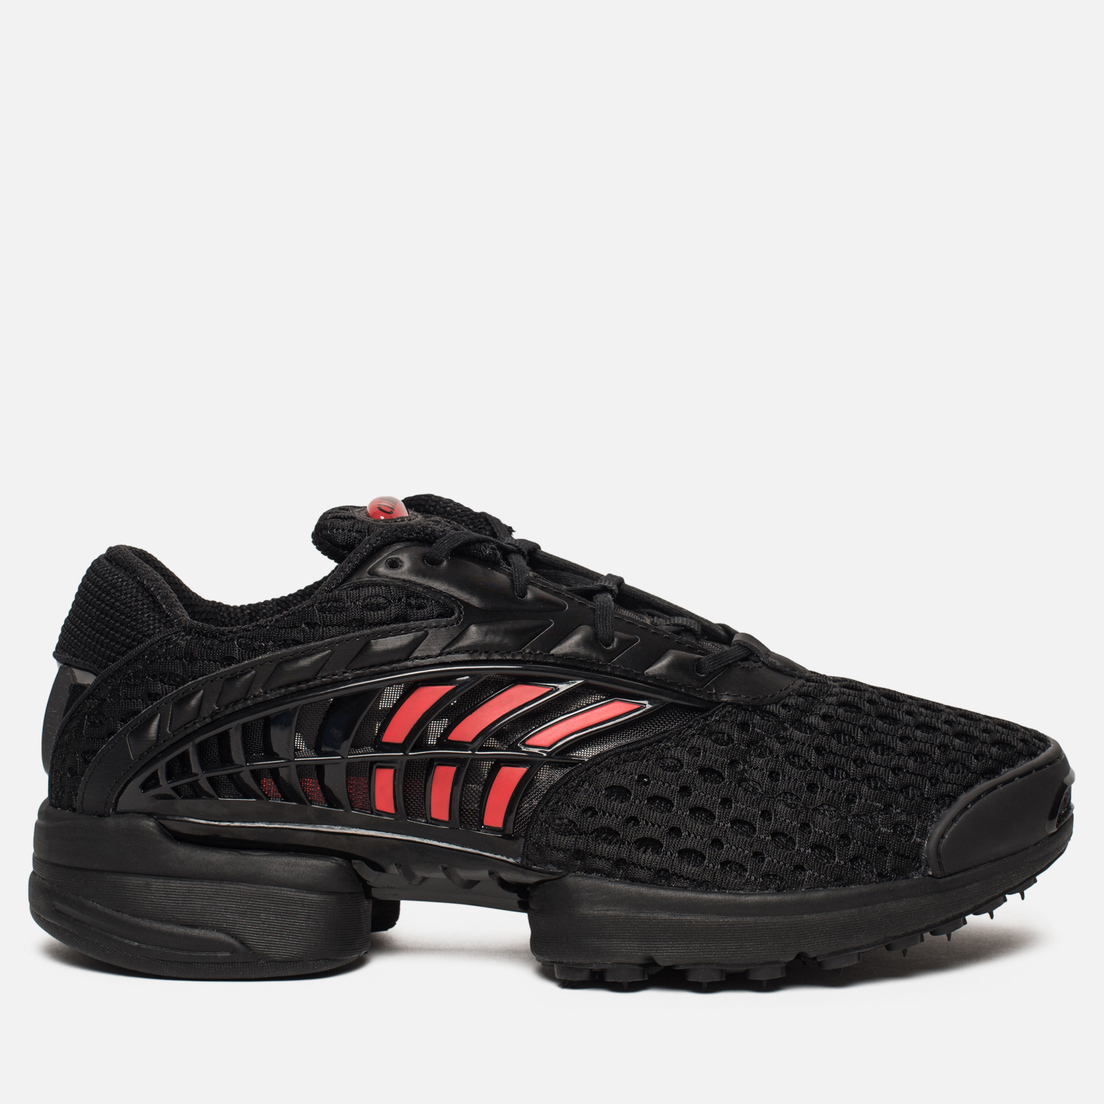 adidas climacool black and red